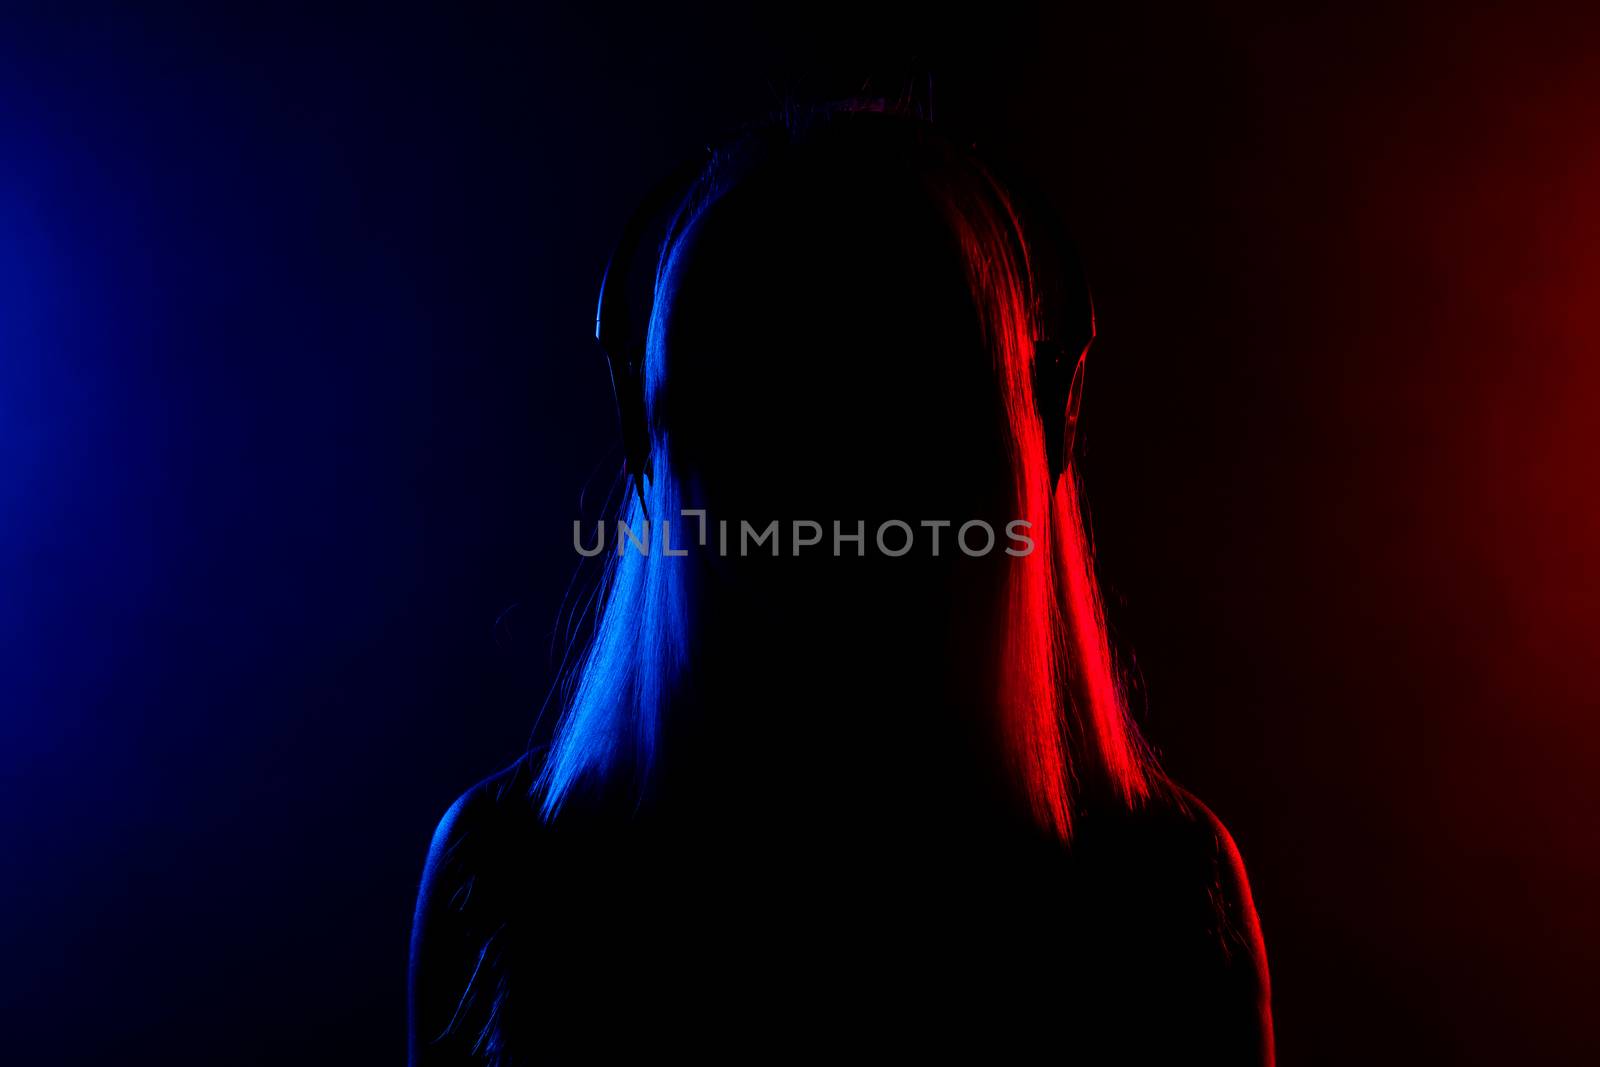 silhouette of a girl with headphones, red and blue lights in the background